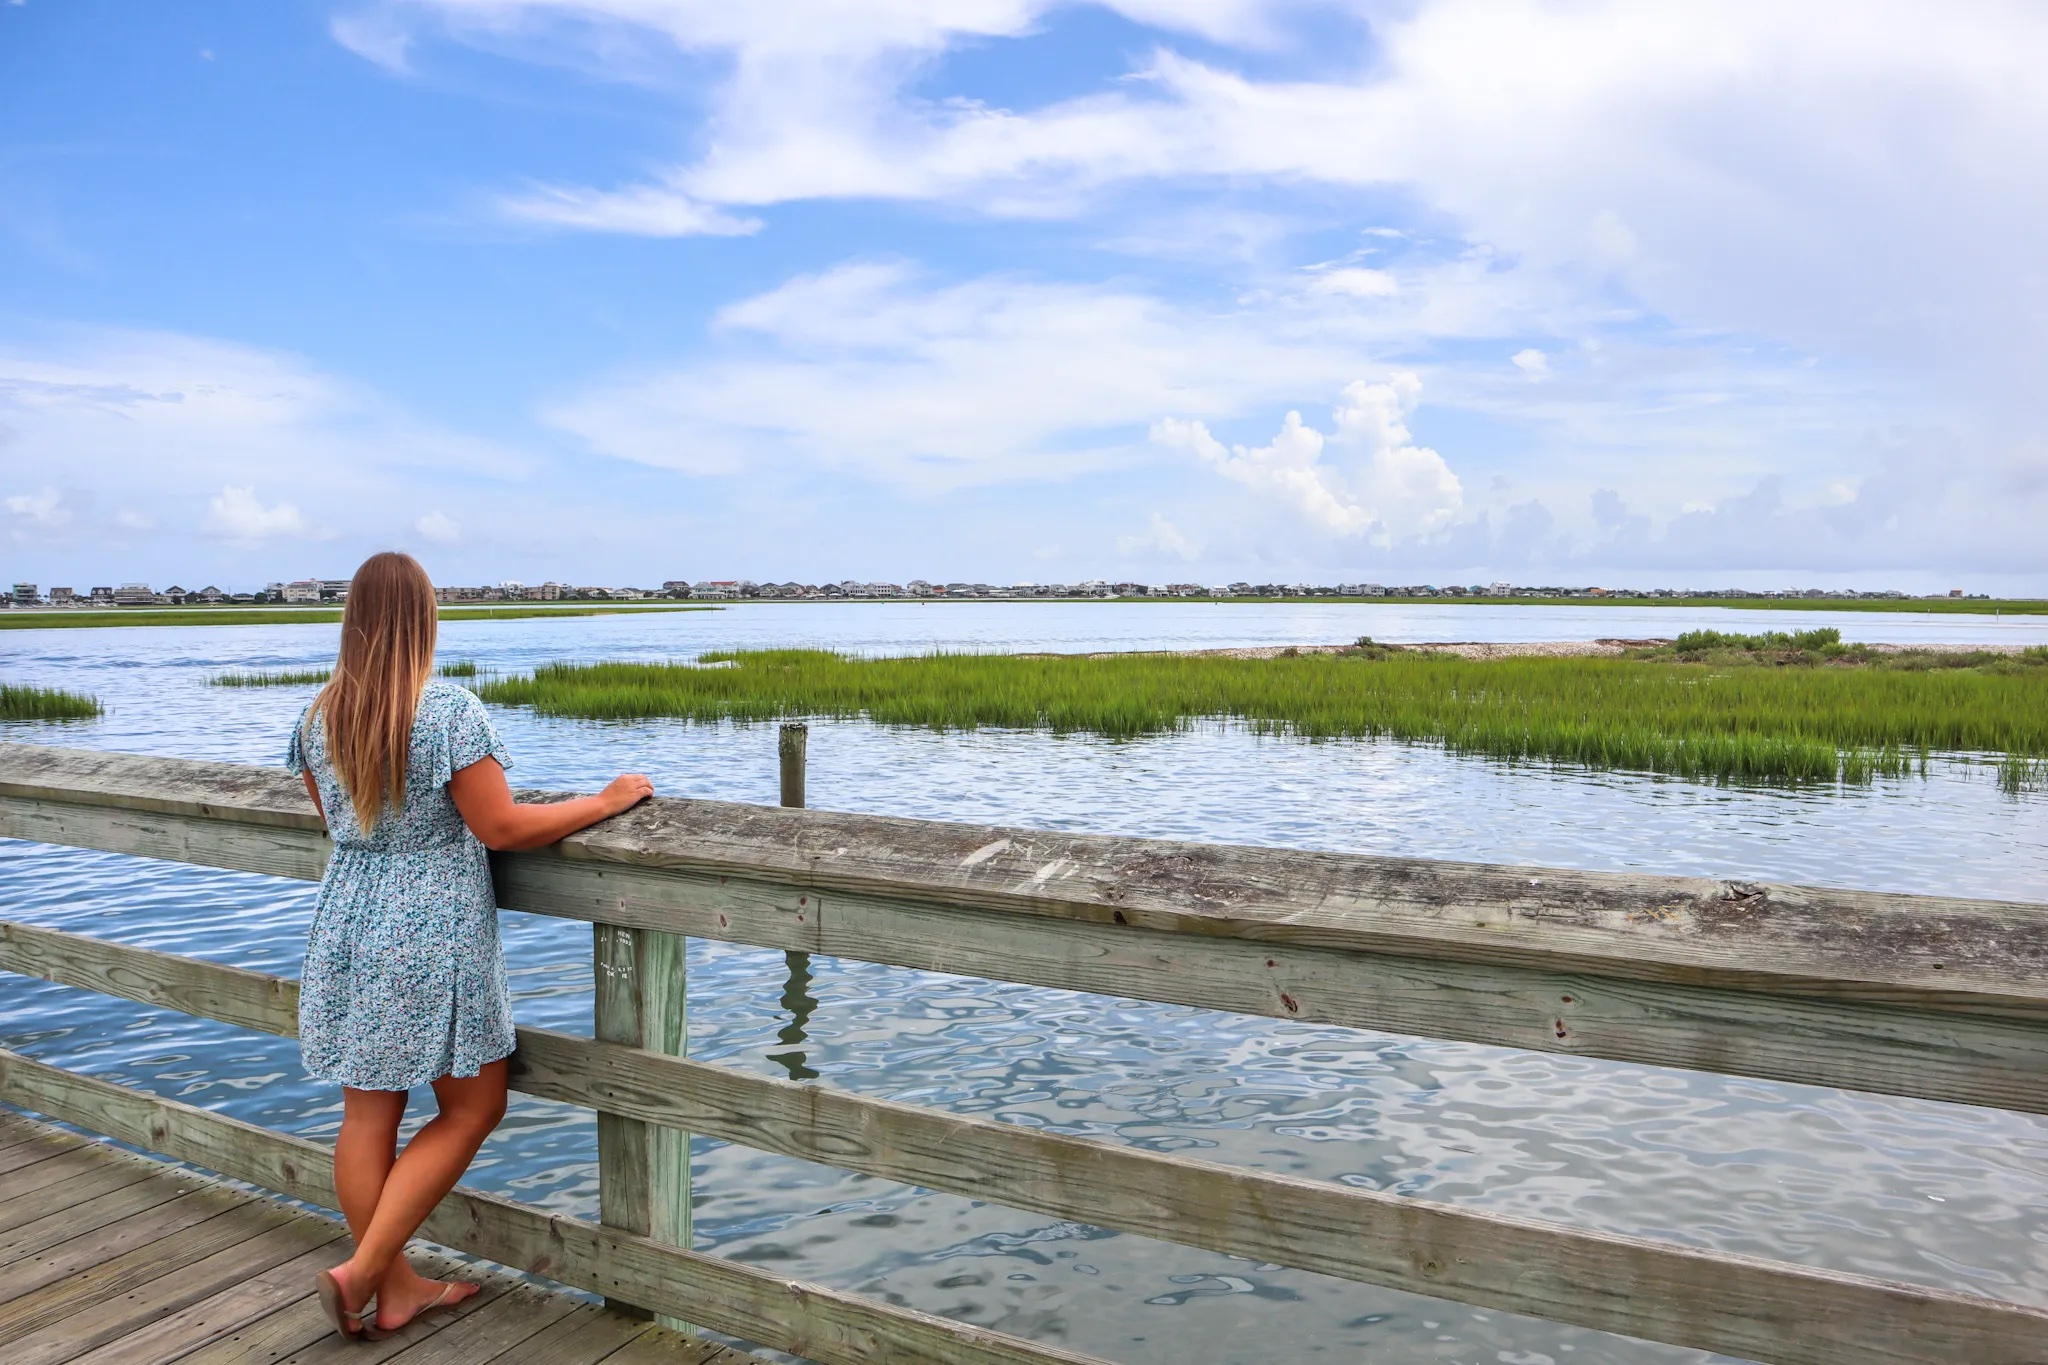 events and places to check out in murrells inlet